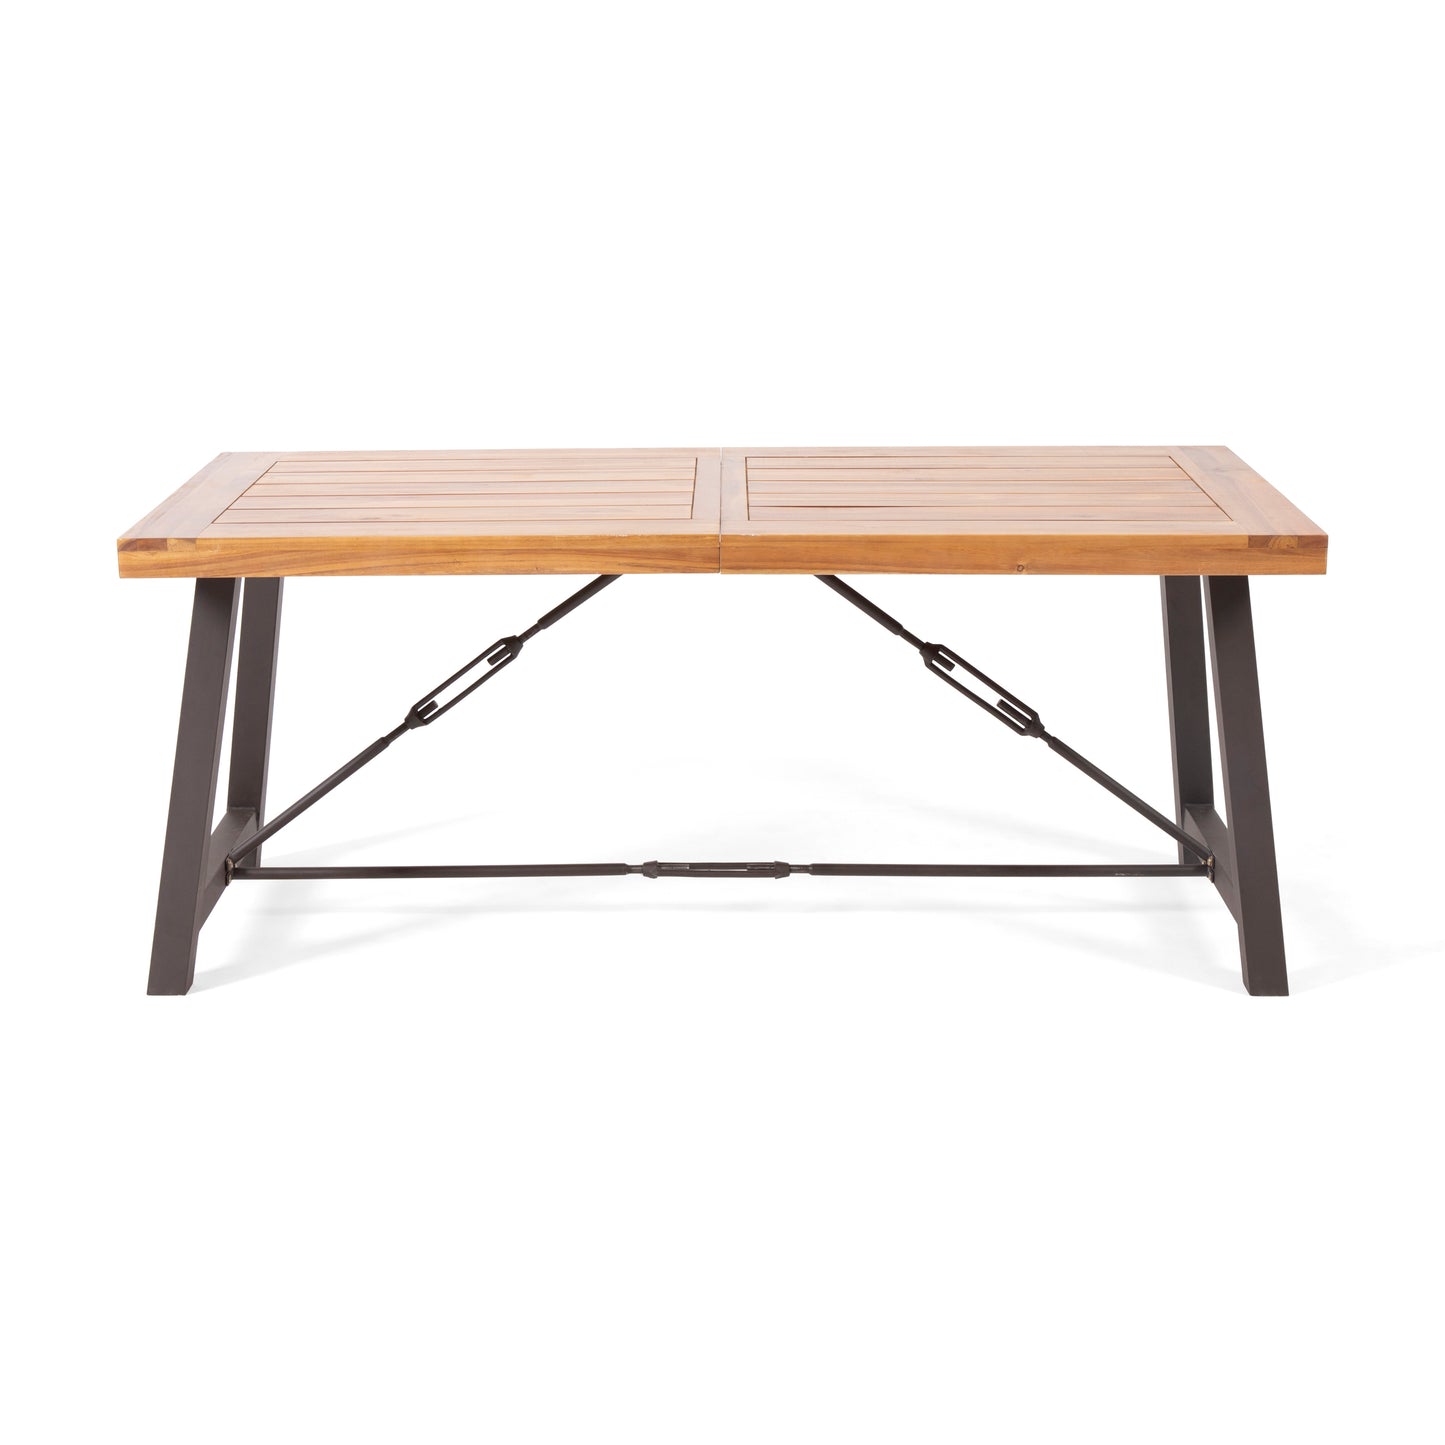 Rosario Modern Industrial Dining Table